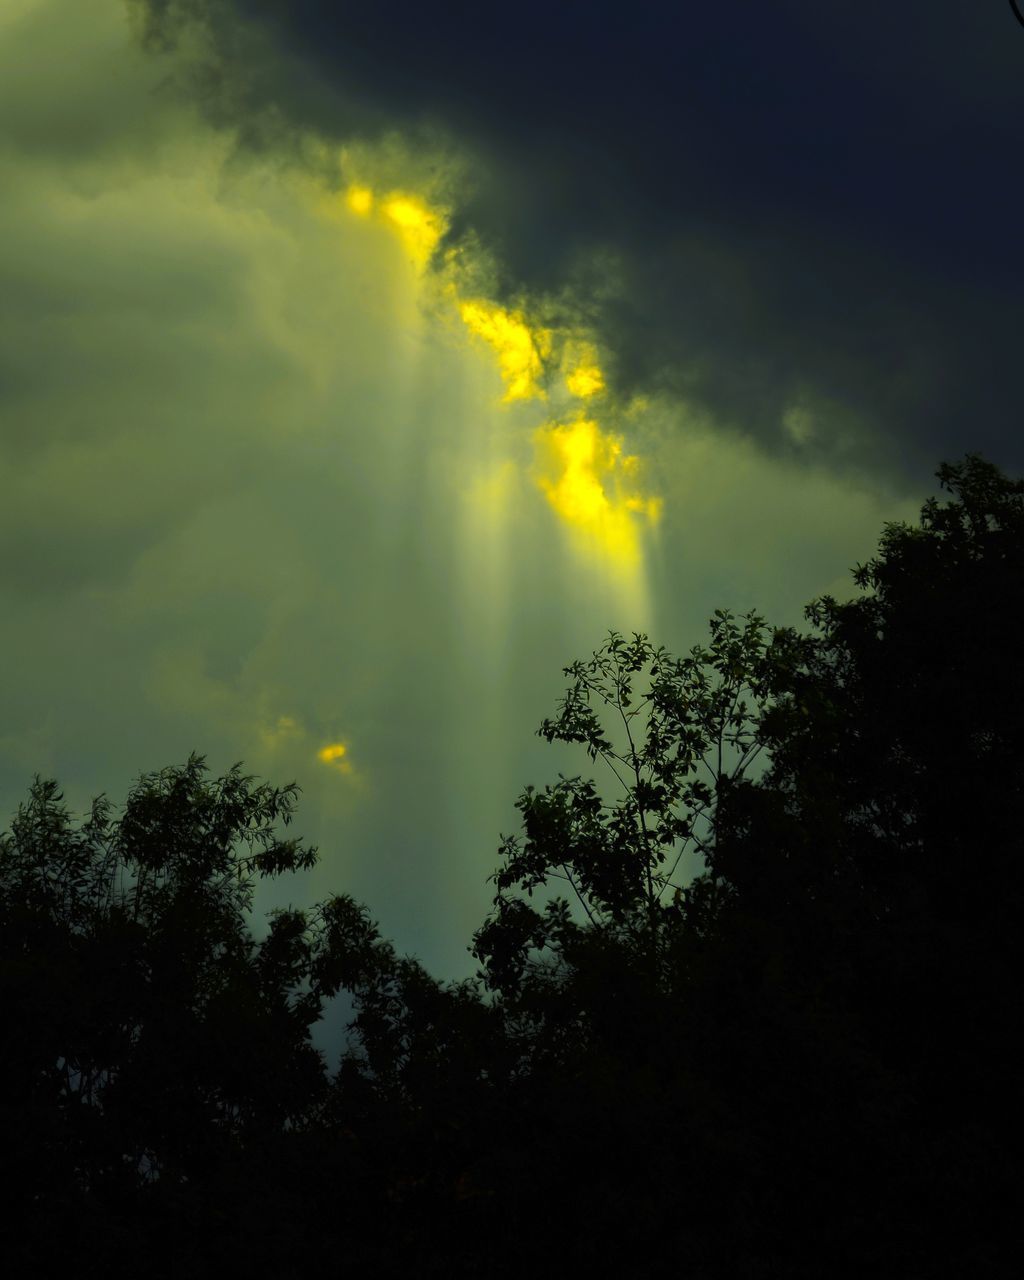 LOW ANGLE VIEW OF SILHOUETTE TREES AGAINST STORM CLOUDS